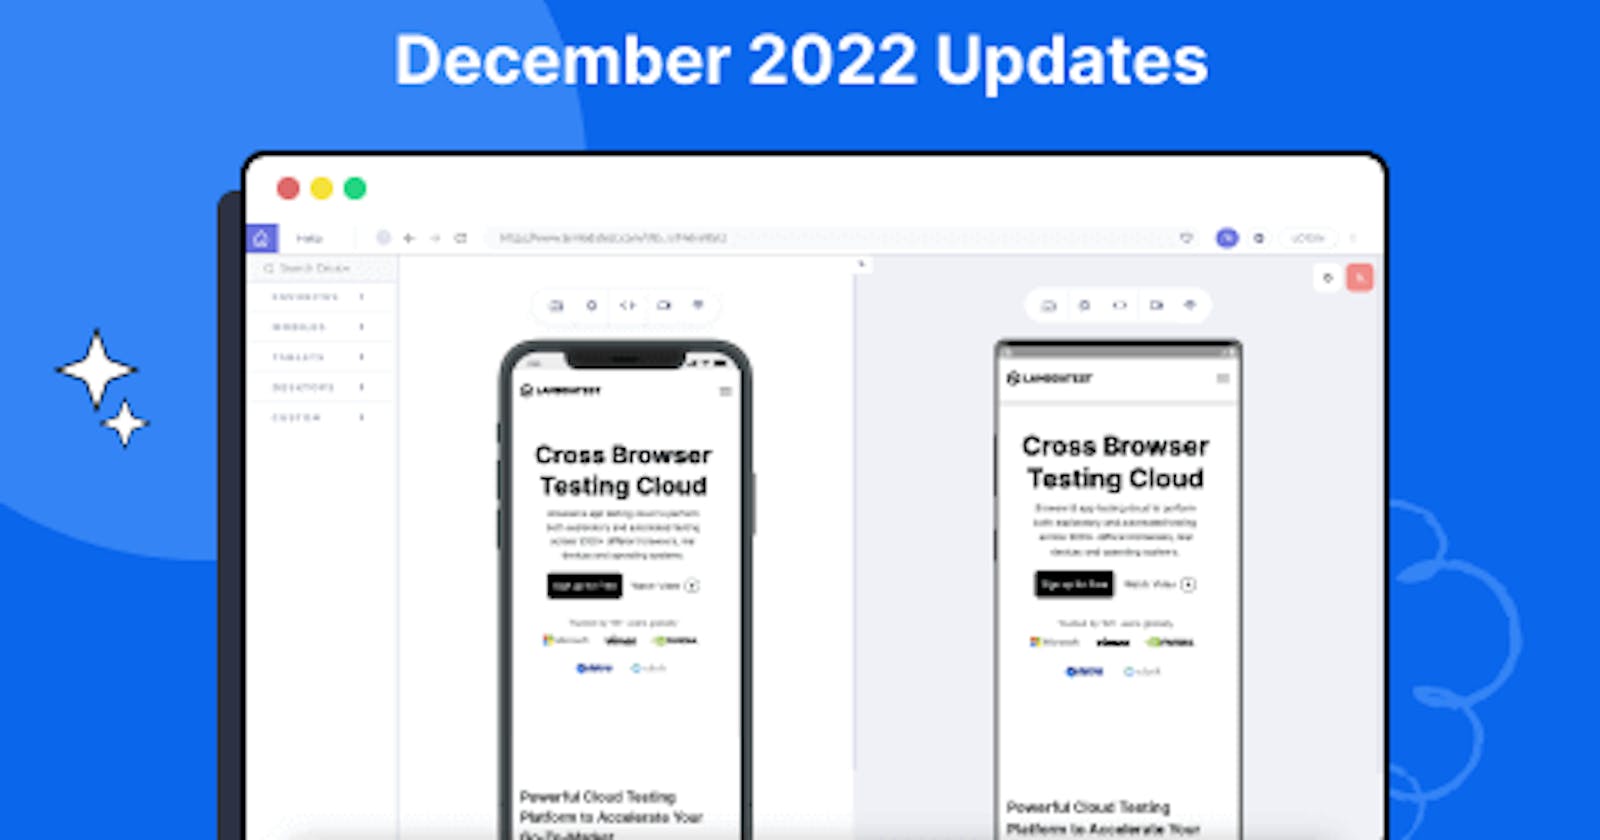 Dec’22 Updates: The All-New LT Browser 2.0, XCUI App Automation with HyperExecute, And More!